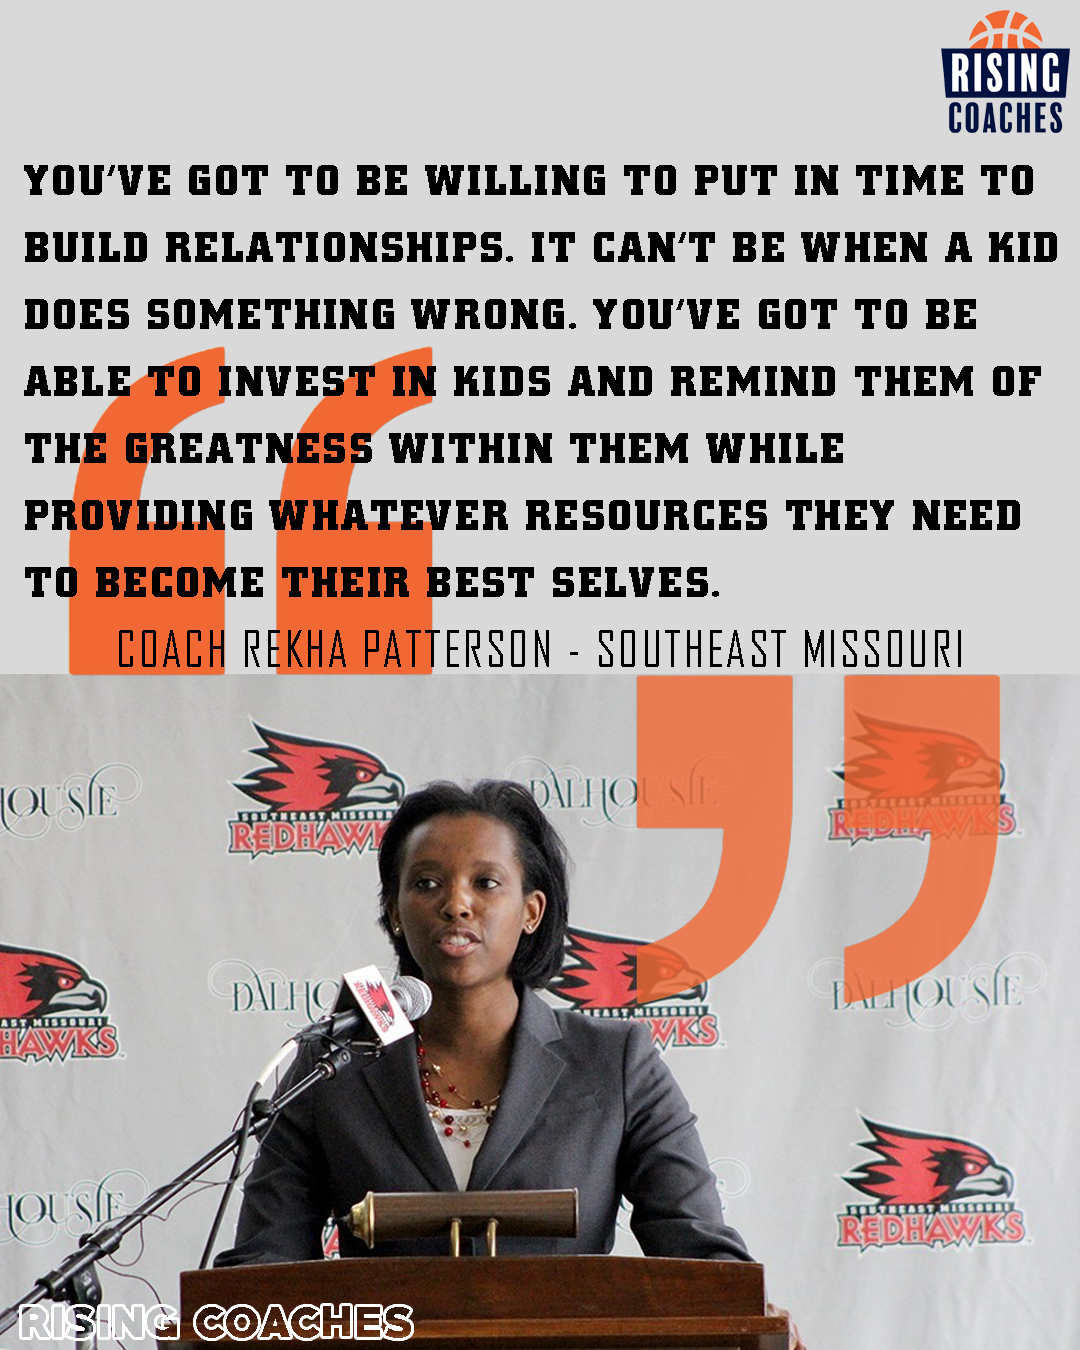 Quotes: Rekha Patterson - SEMO on How She Builds Relationships